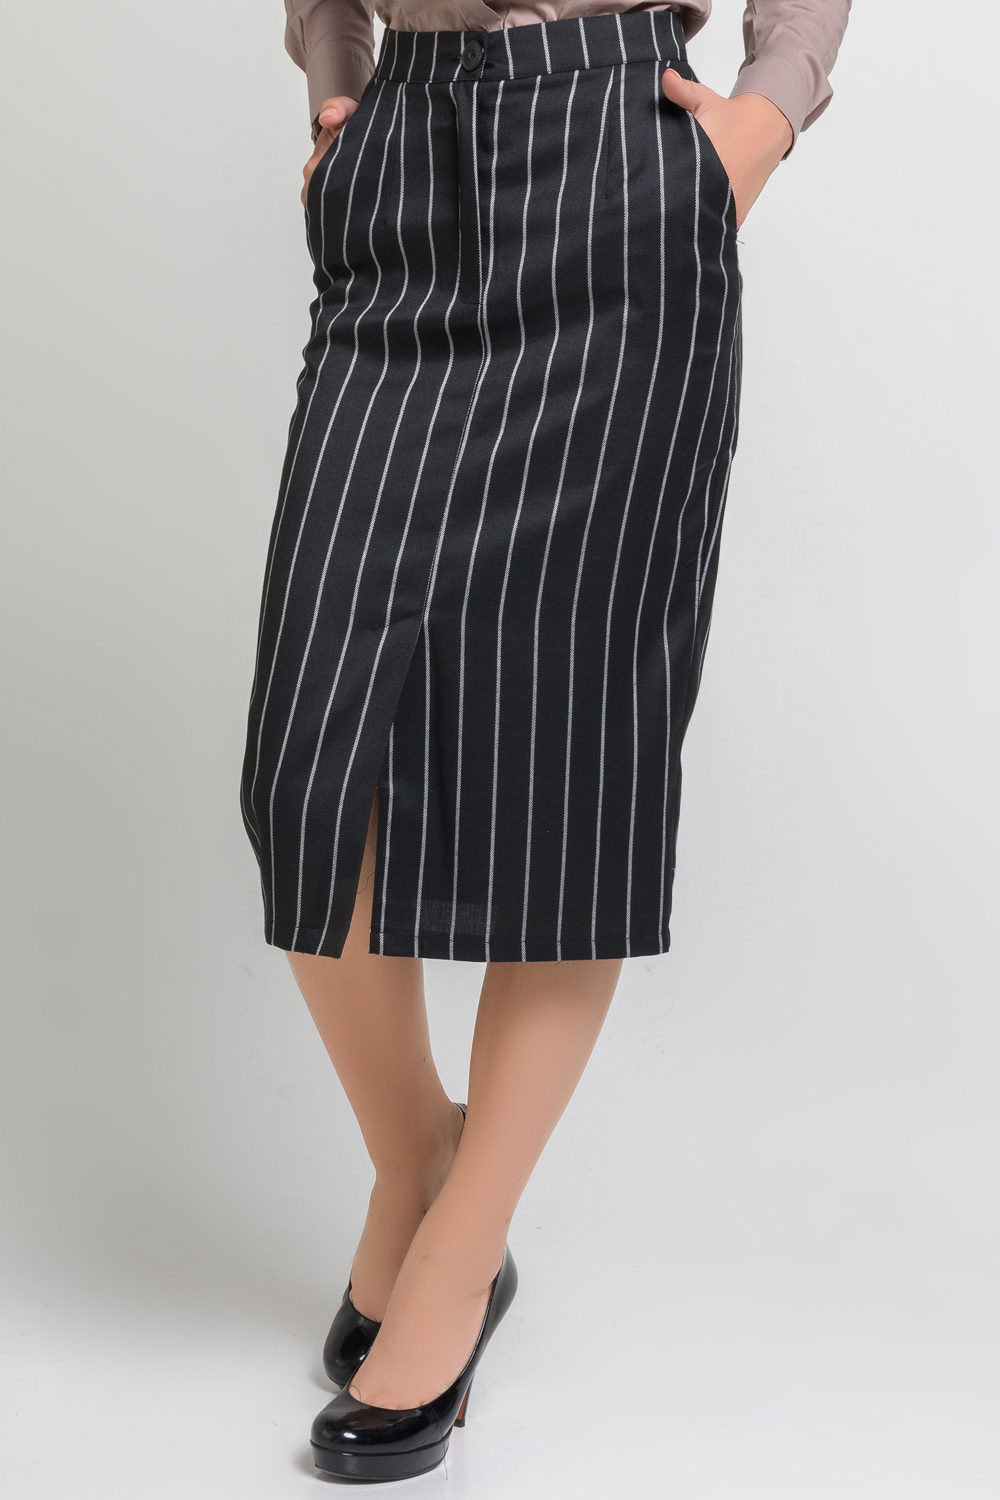 Striped midi skirt with pockets and front cutout.